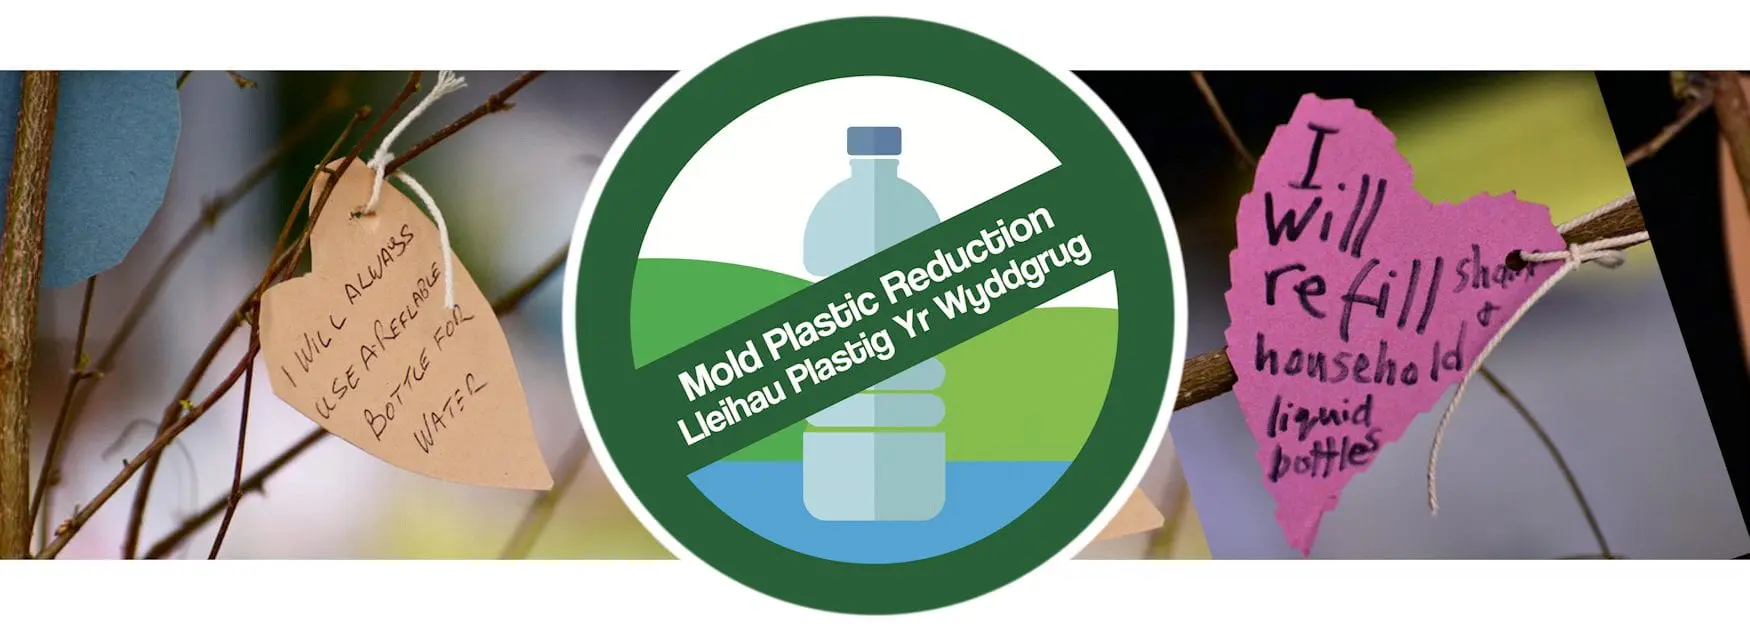 Header image for Household page showing pledges to use less plastic